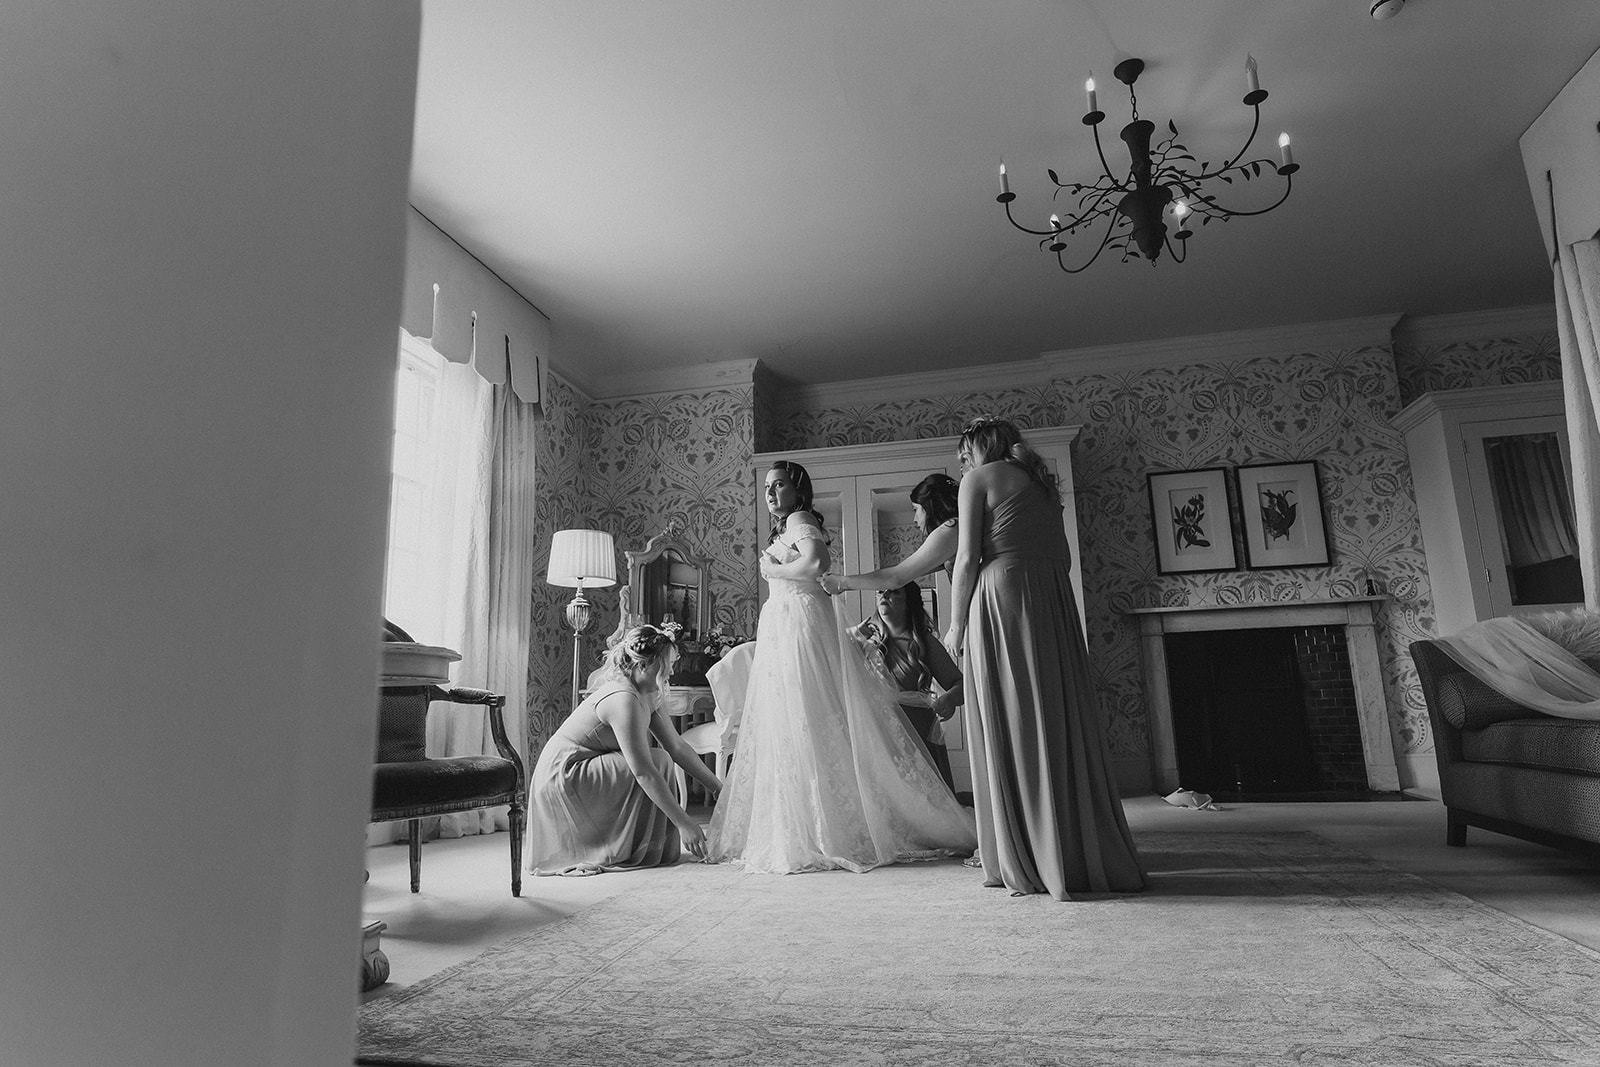 The bride having help with her wedding dress on the morning of her wedding